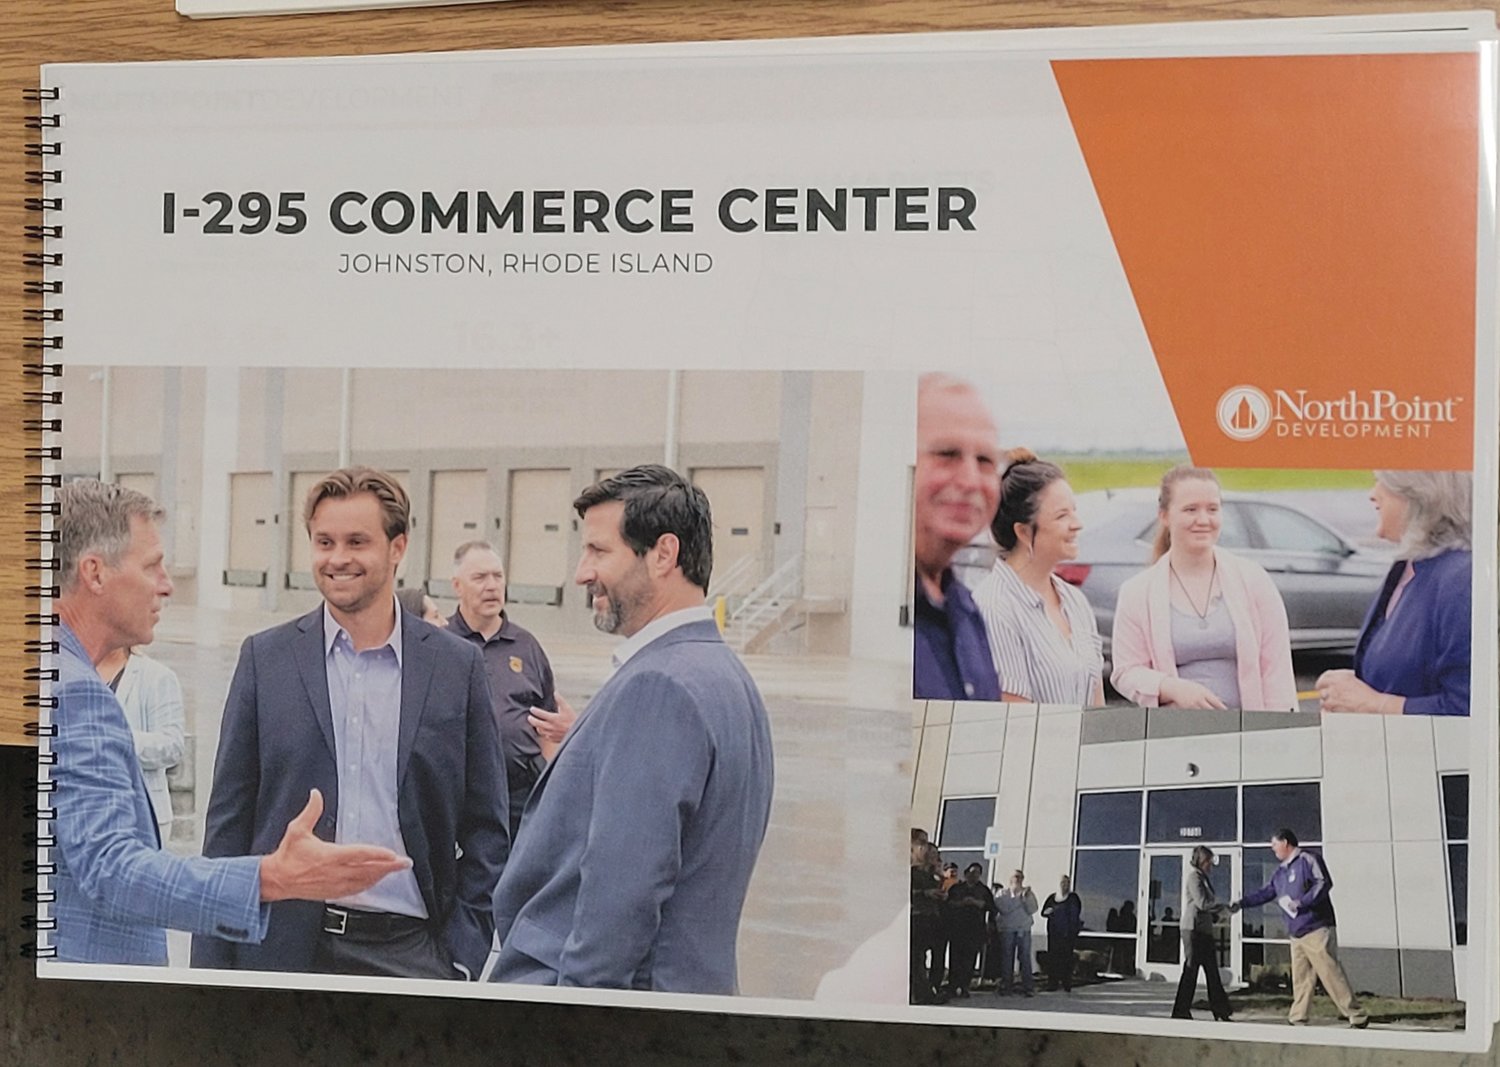 THE PROPOSAL: NorthPoint hopes to build the “I-295 Commerce Center,” a $75 million, 555,980 square foot warehouse facility off Stonehill Drive, between the Home Depot and the BJ’s Wholesale Club.